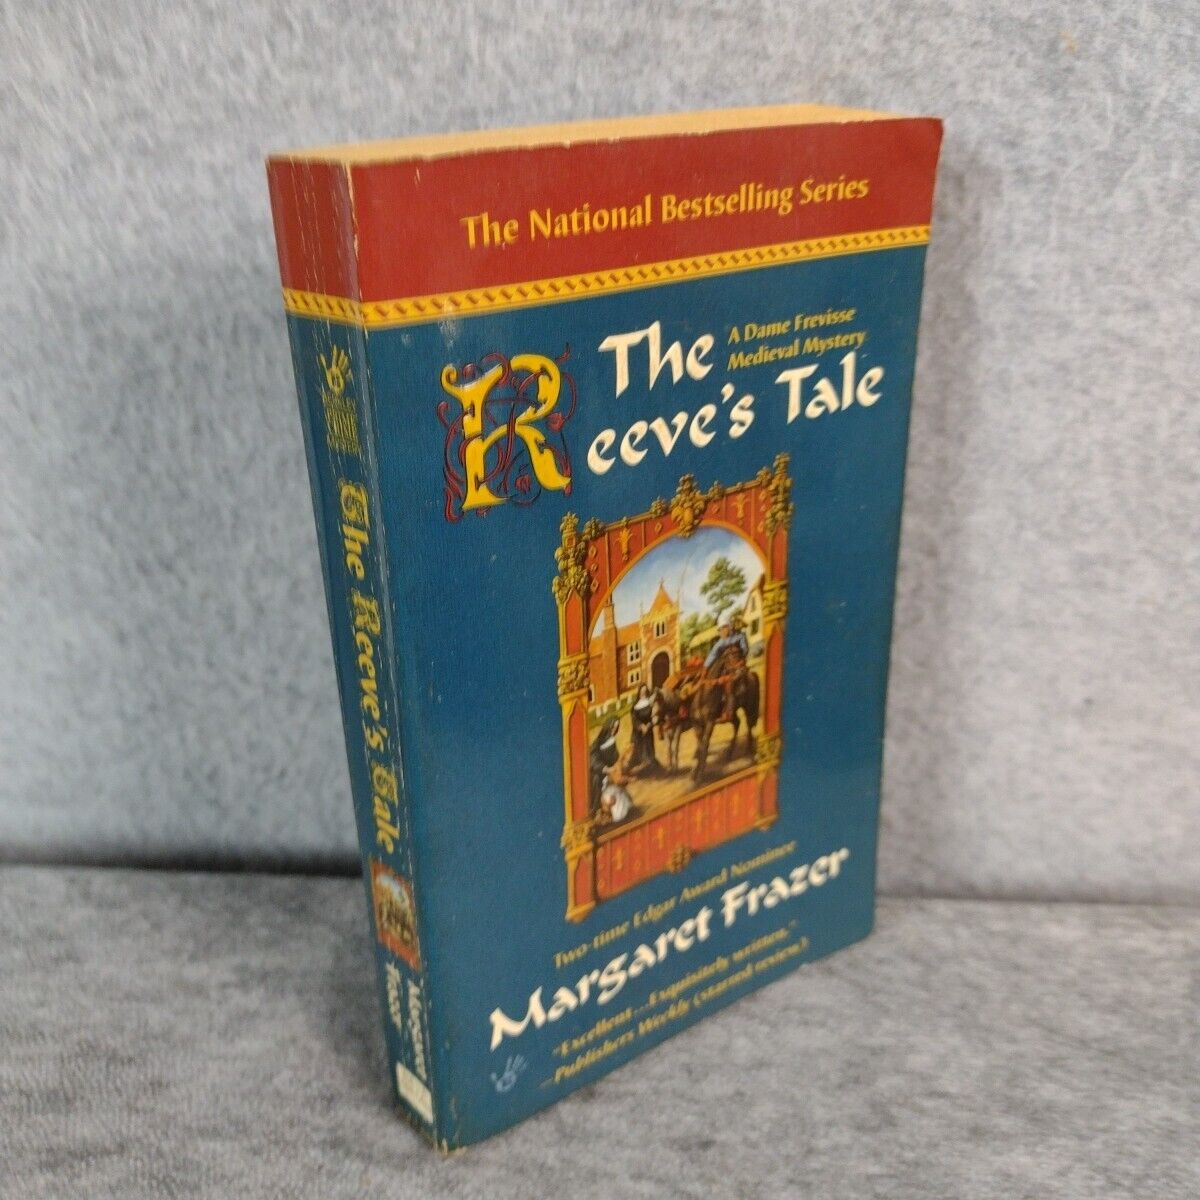 The Reeve\'s Tale by Margaret Frazer (2000, Mass Market, Reprint)